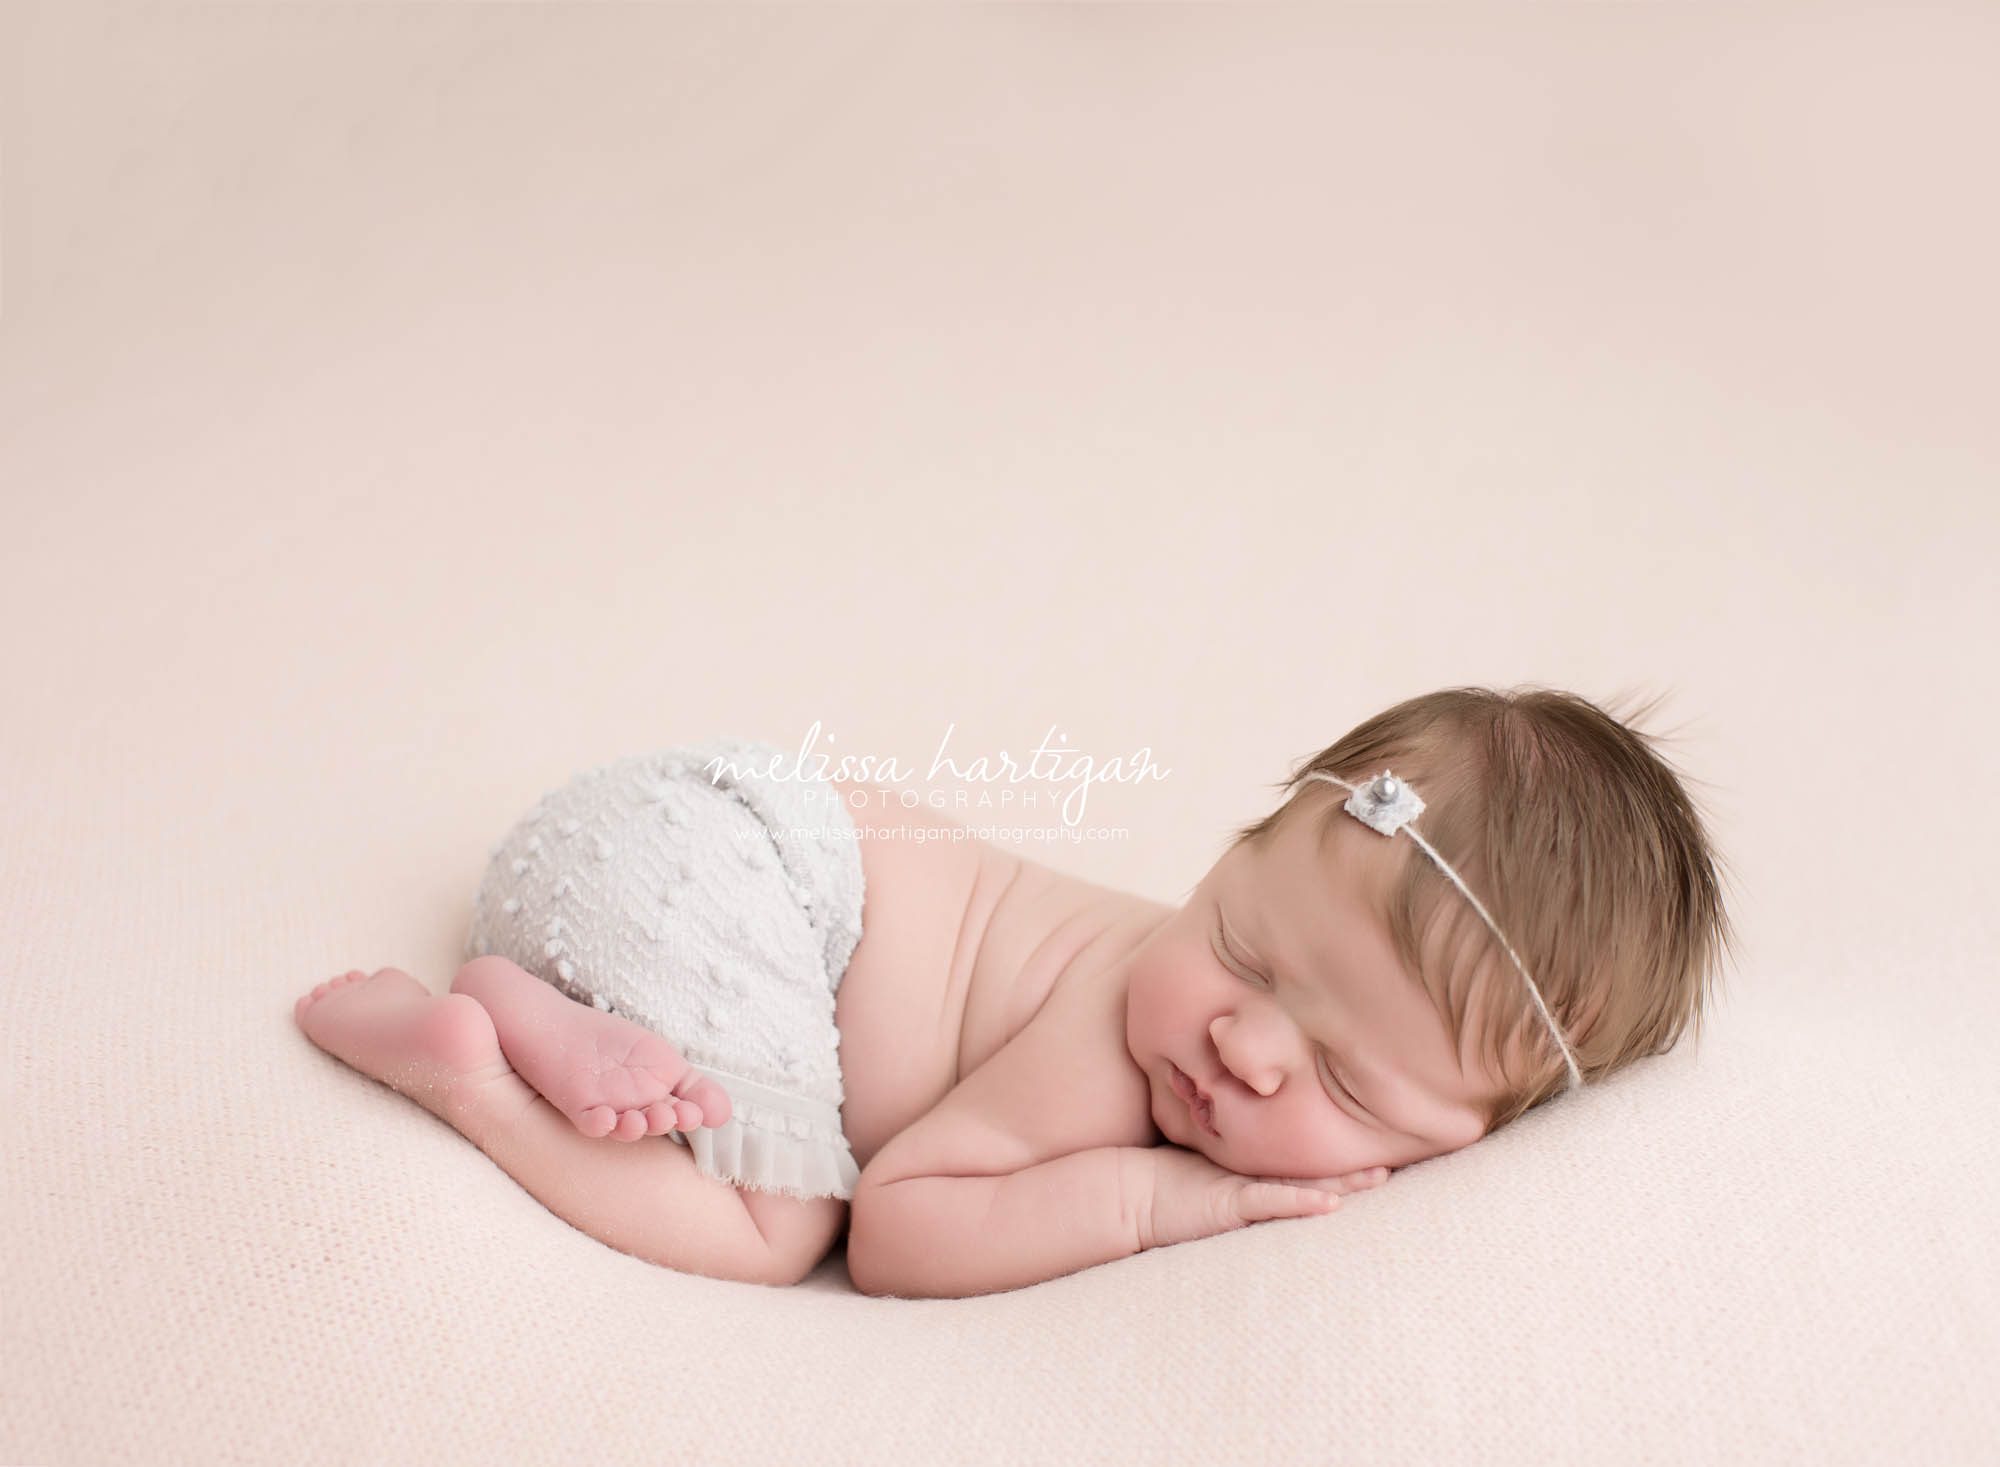 Melissa Hartigan Photography Connecticut Newborn Photographer Coventry Ct Middlefield CT baby Fairfield county Newborn and maternity CT photographer Baby girl gray headband and knit shorts laying on pink blanket